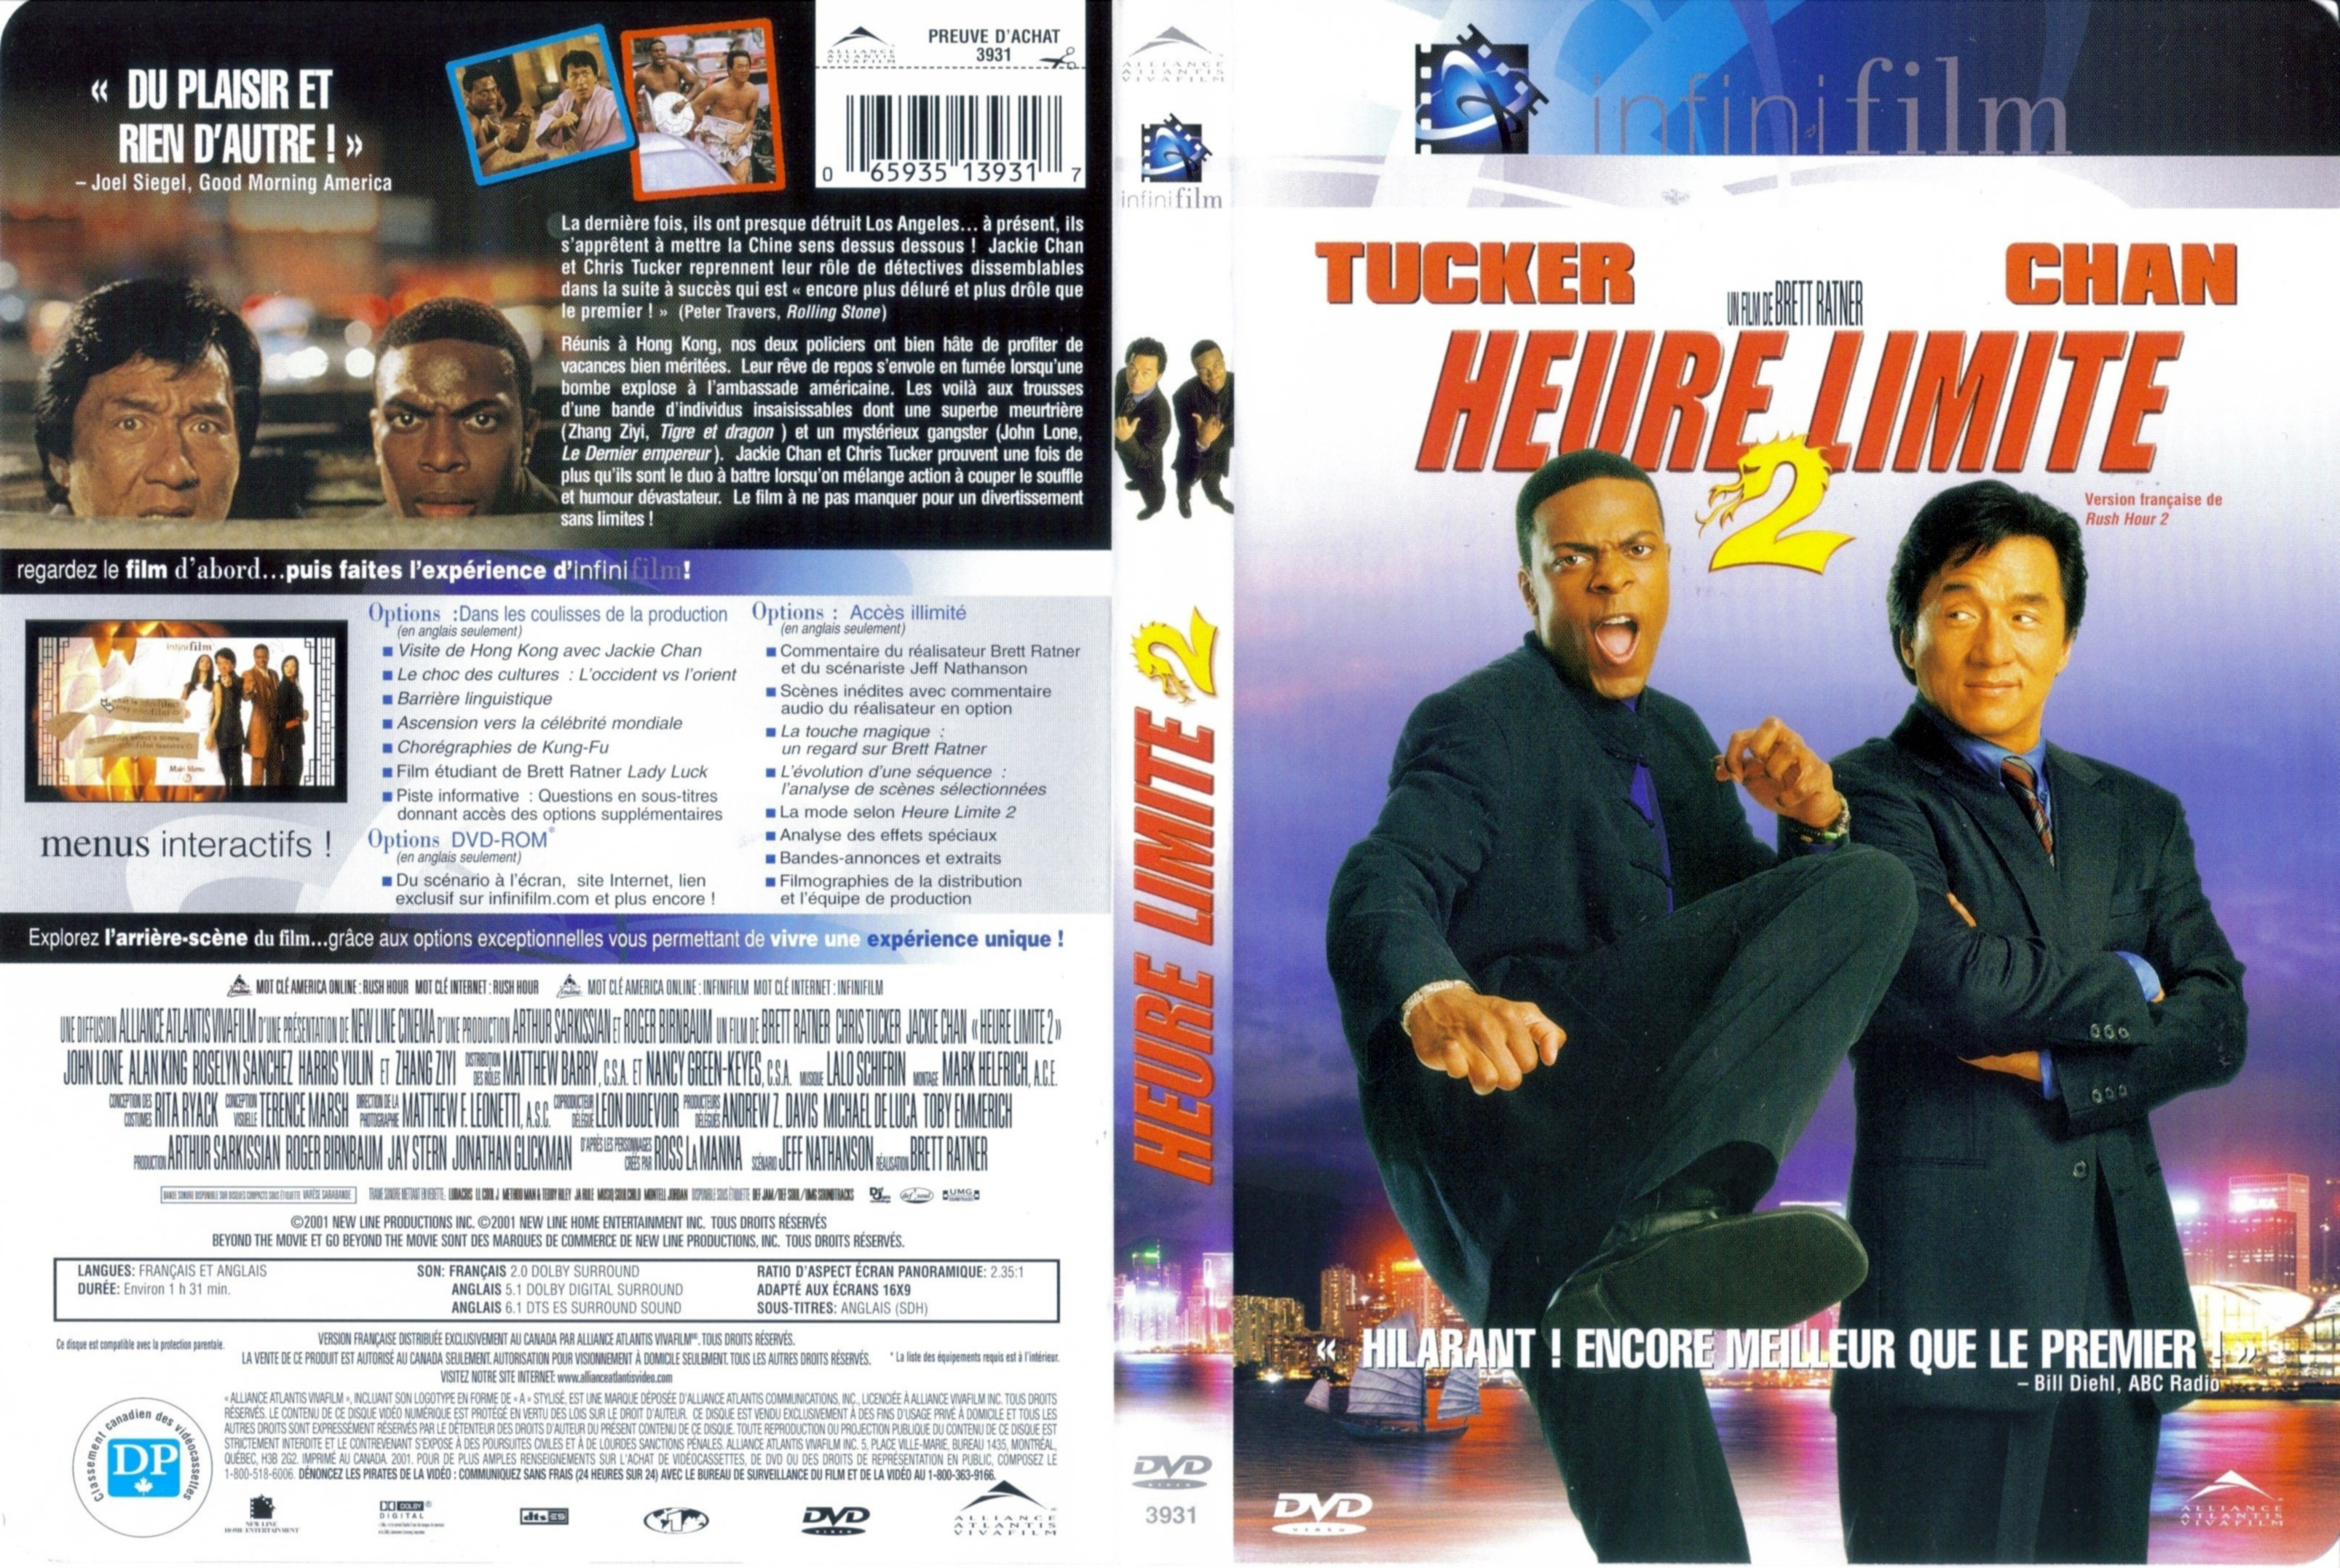 Jaquette DVD Heure limite 2 - Rush hour 2 (Canadienne)